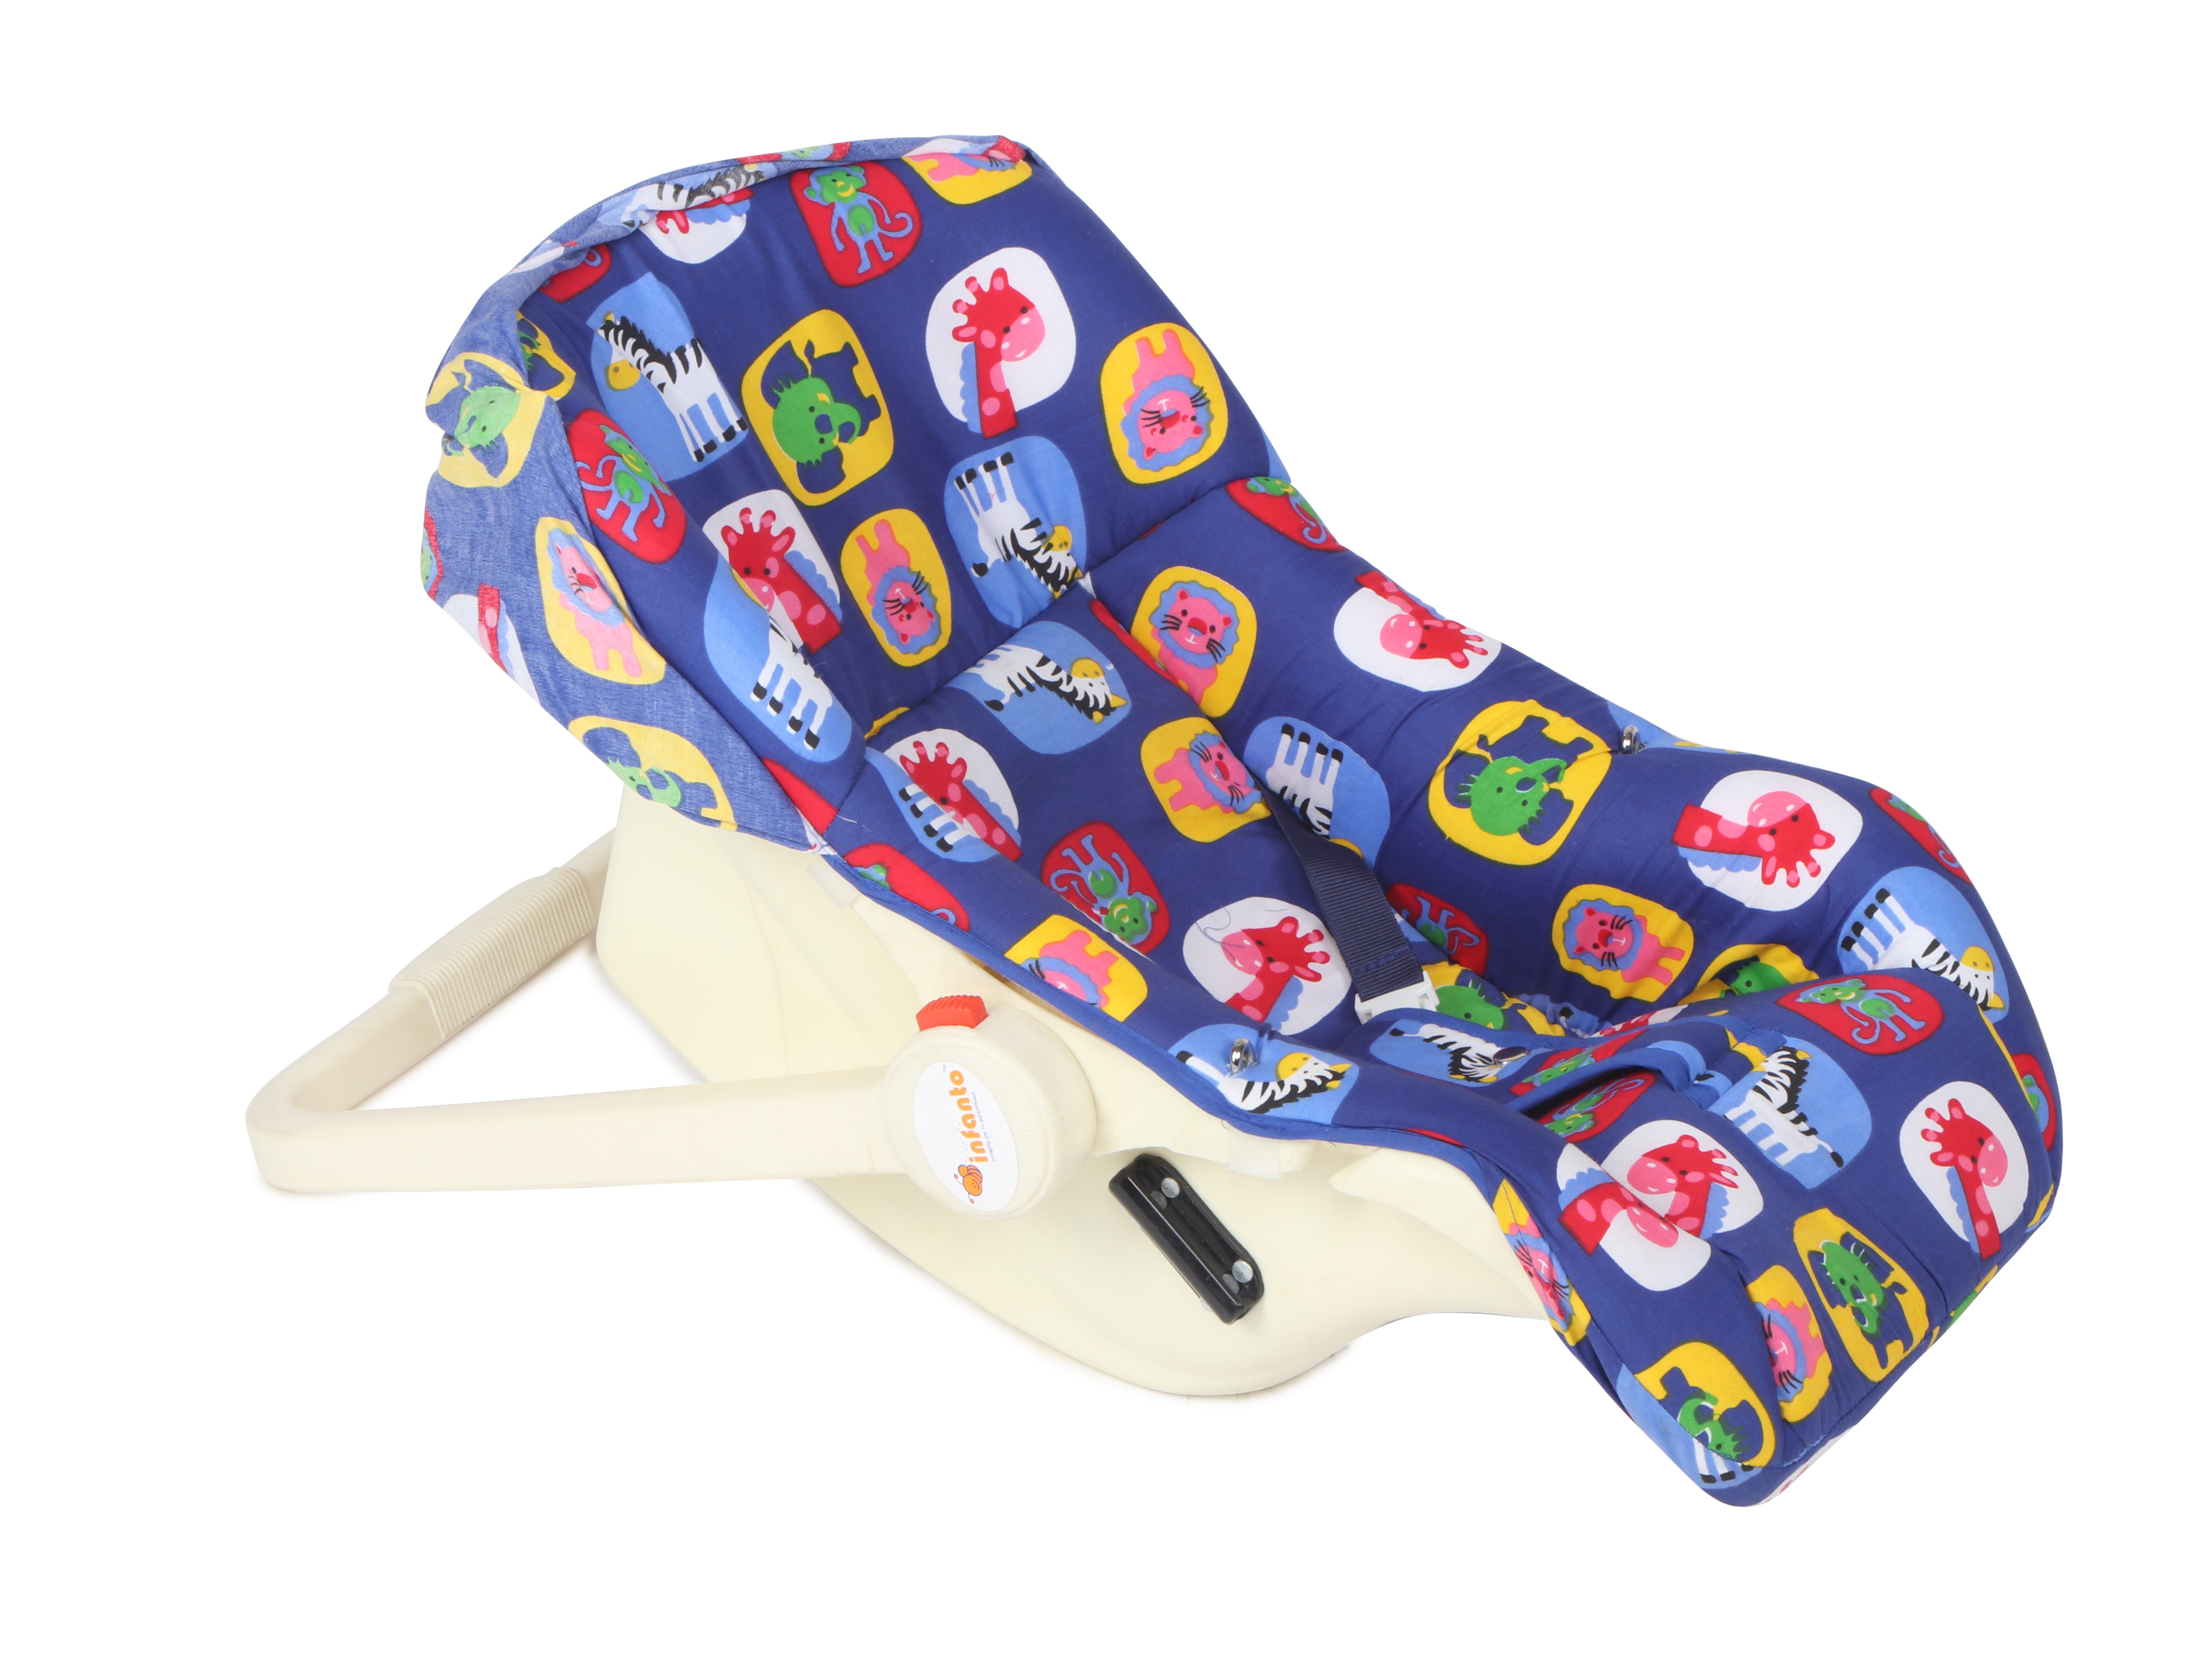 INFANTO Multipurpose 9 in 1 Baby Bouncer Birth upto 12 Months - RB38